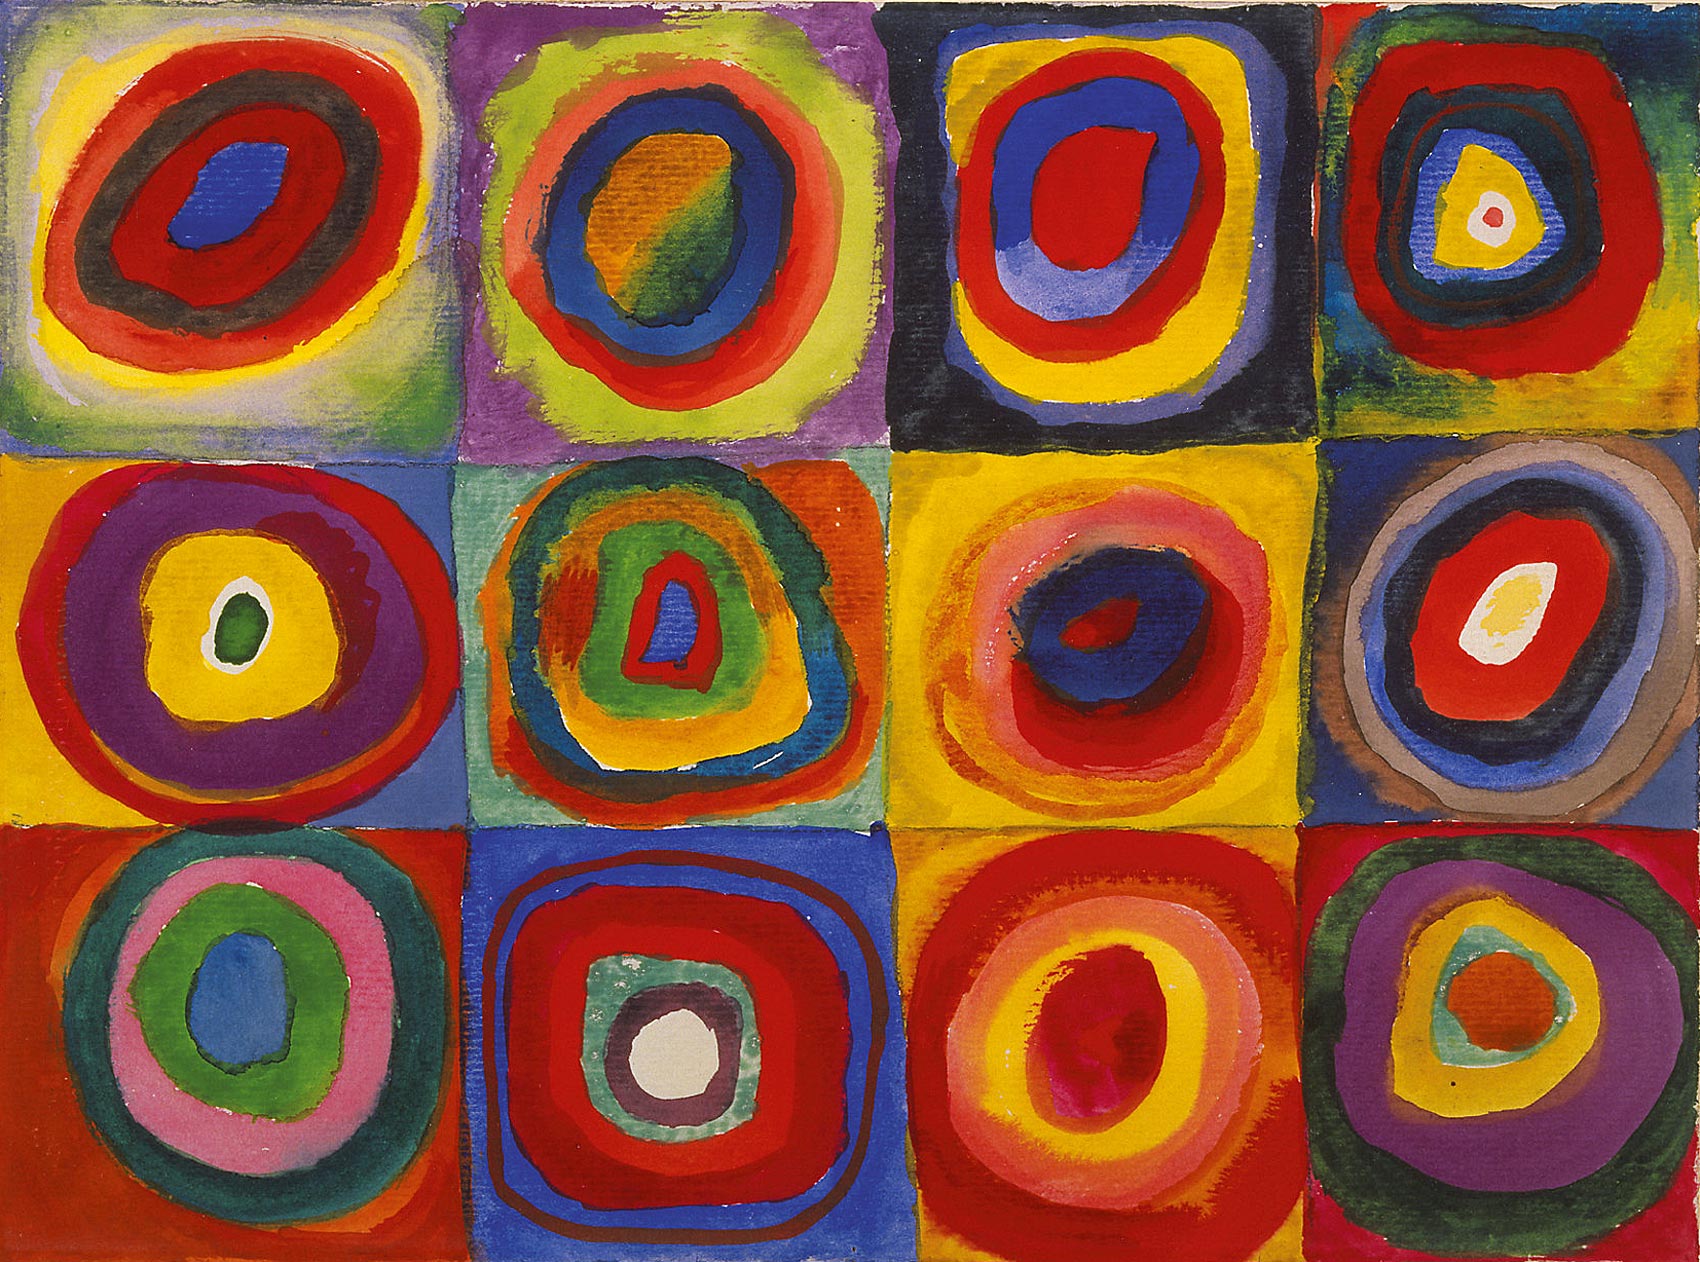 "Squares with Concentric Circles" Wassily Kandinsky, 1913